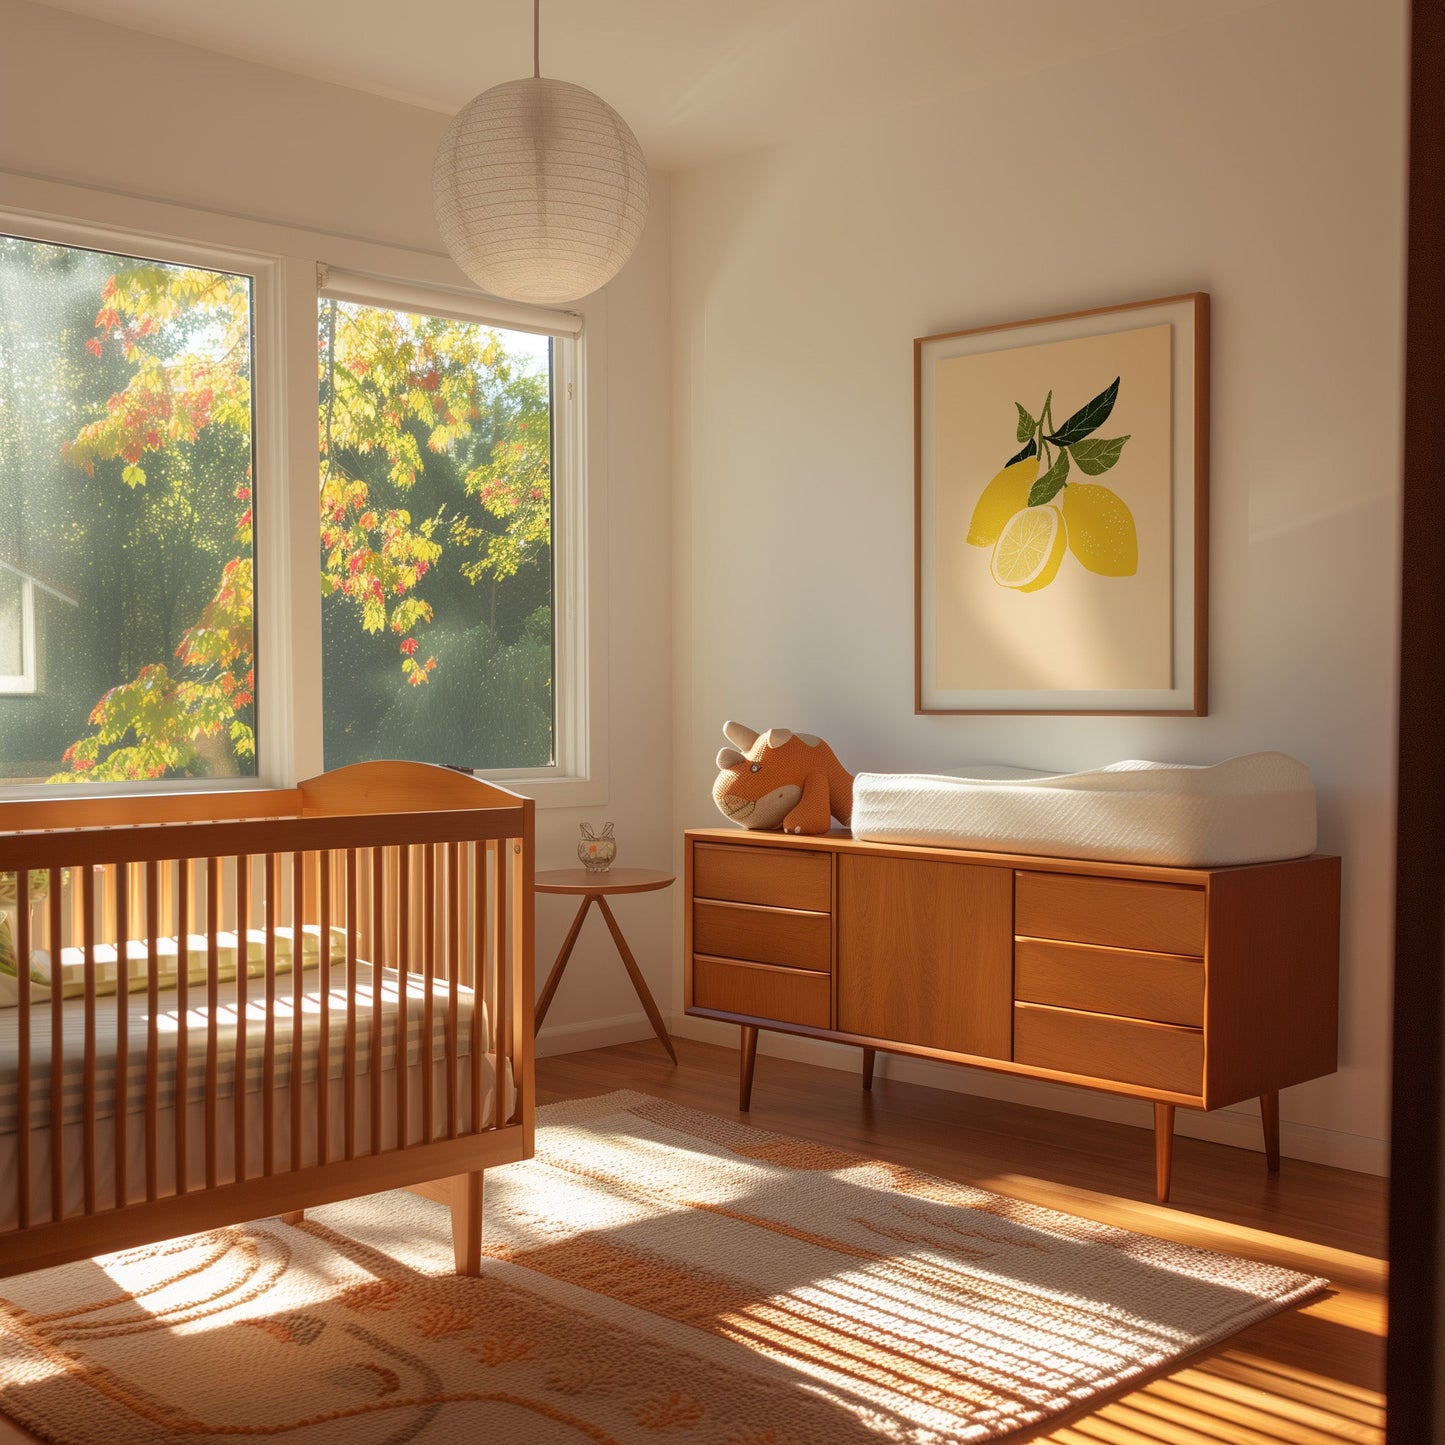 A cozy nursery with a crib, dresser, and warm sunlight filtering through autumn leaves outside the window.